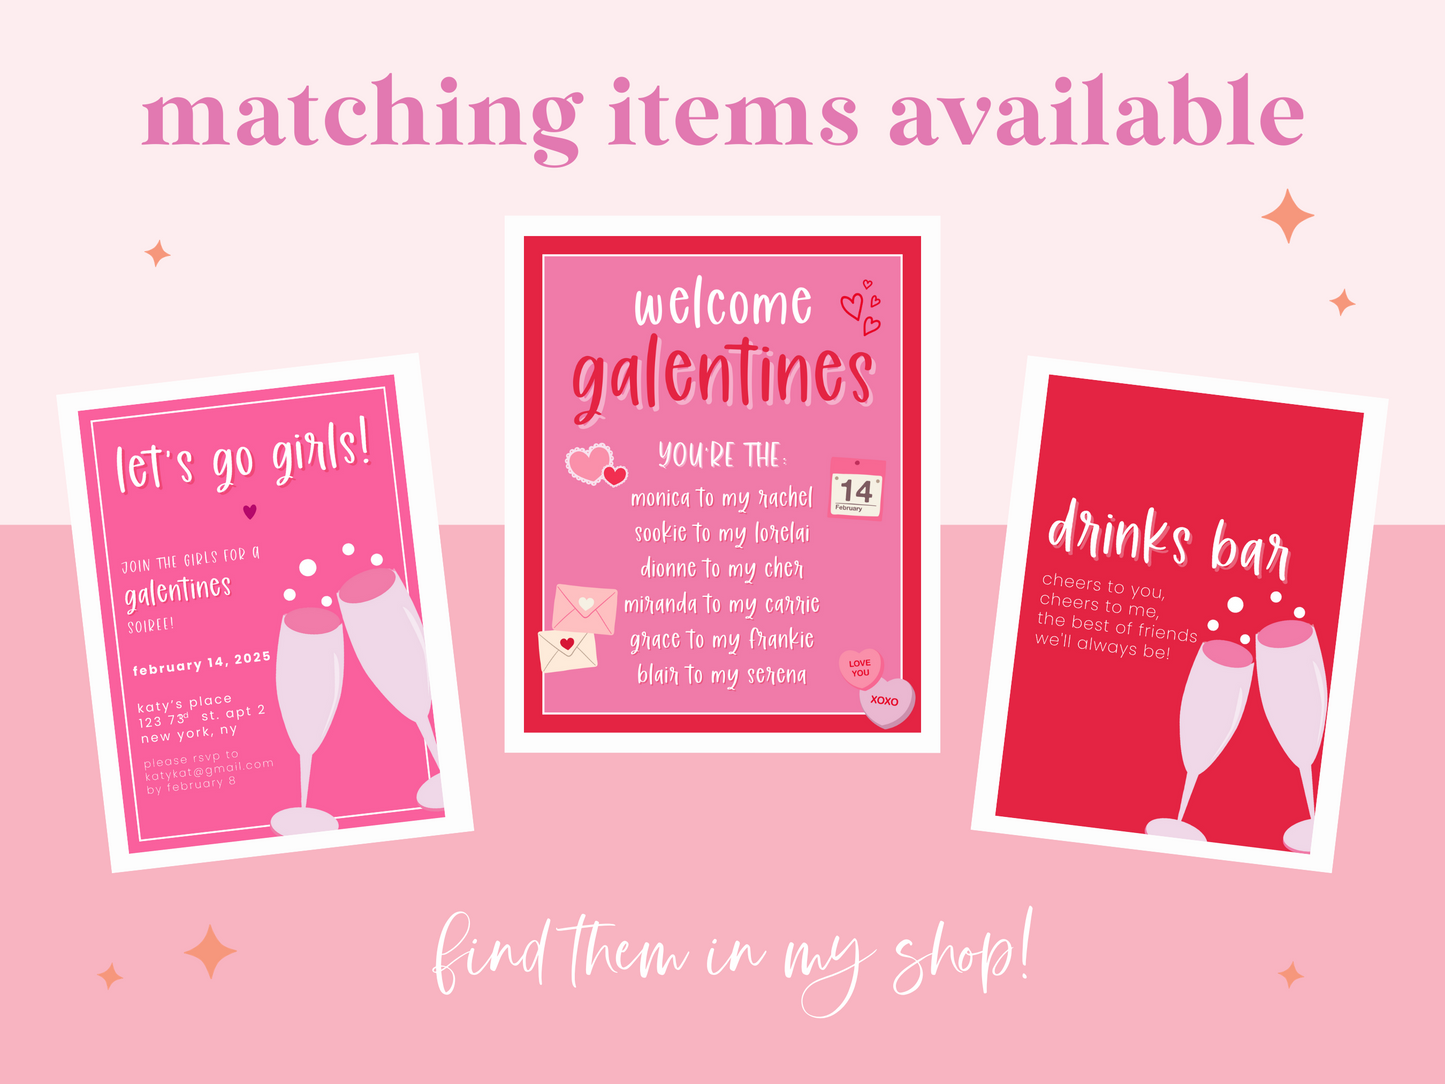 Galentine's Day Party Welcome Sign Printable